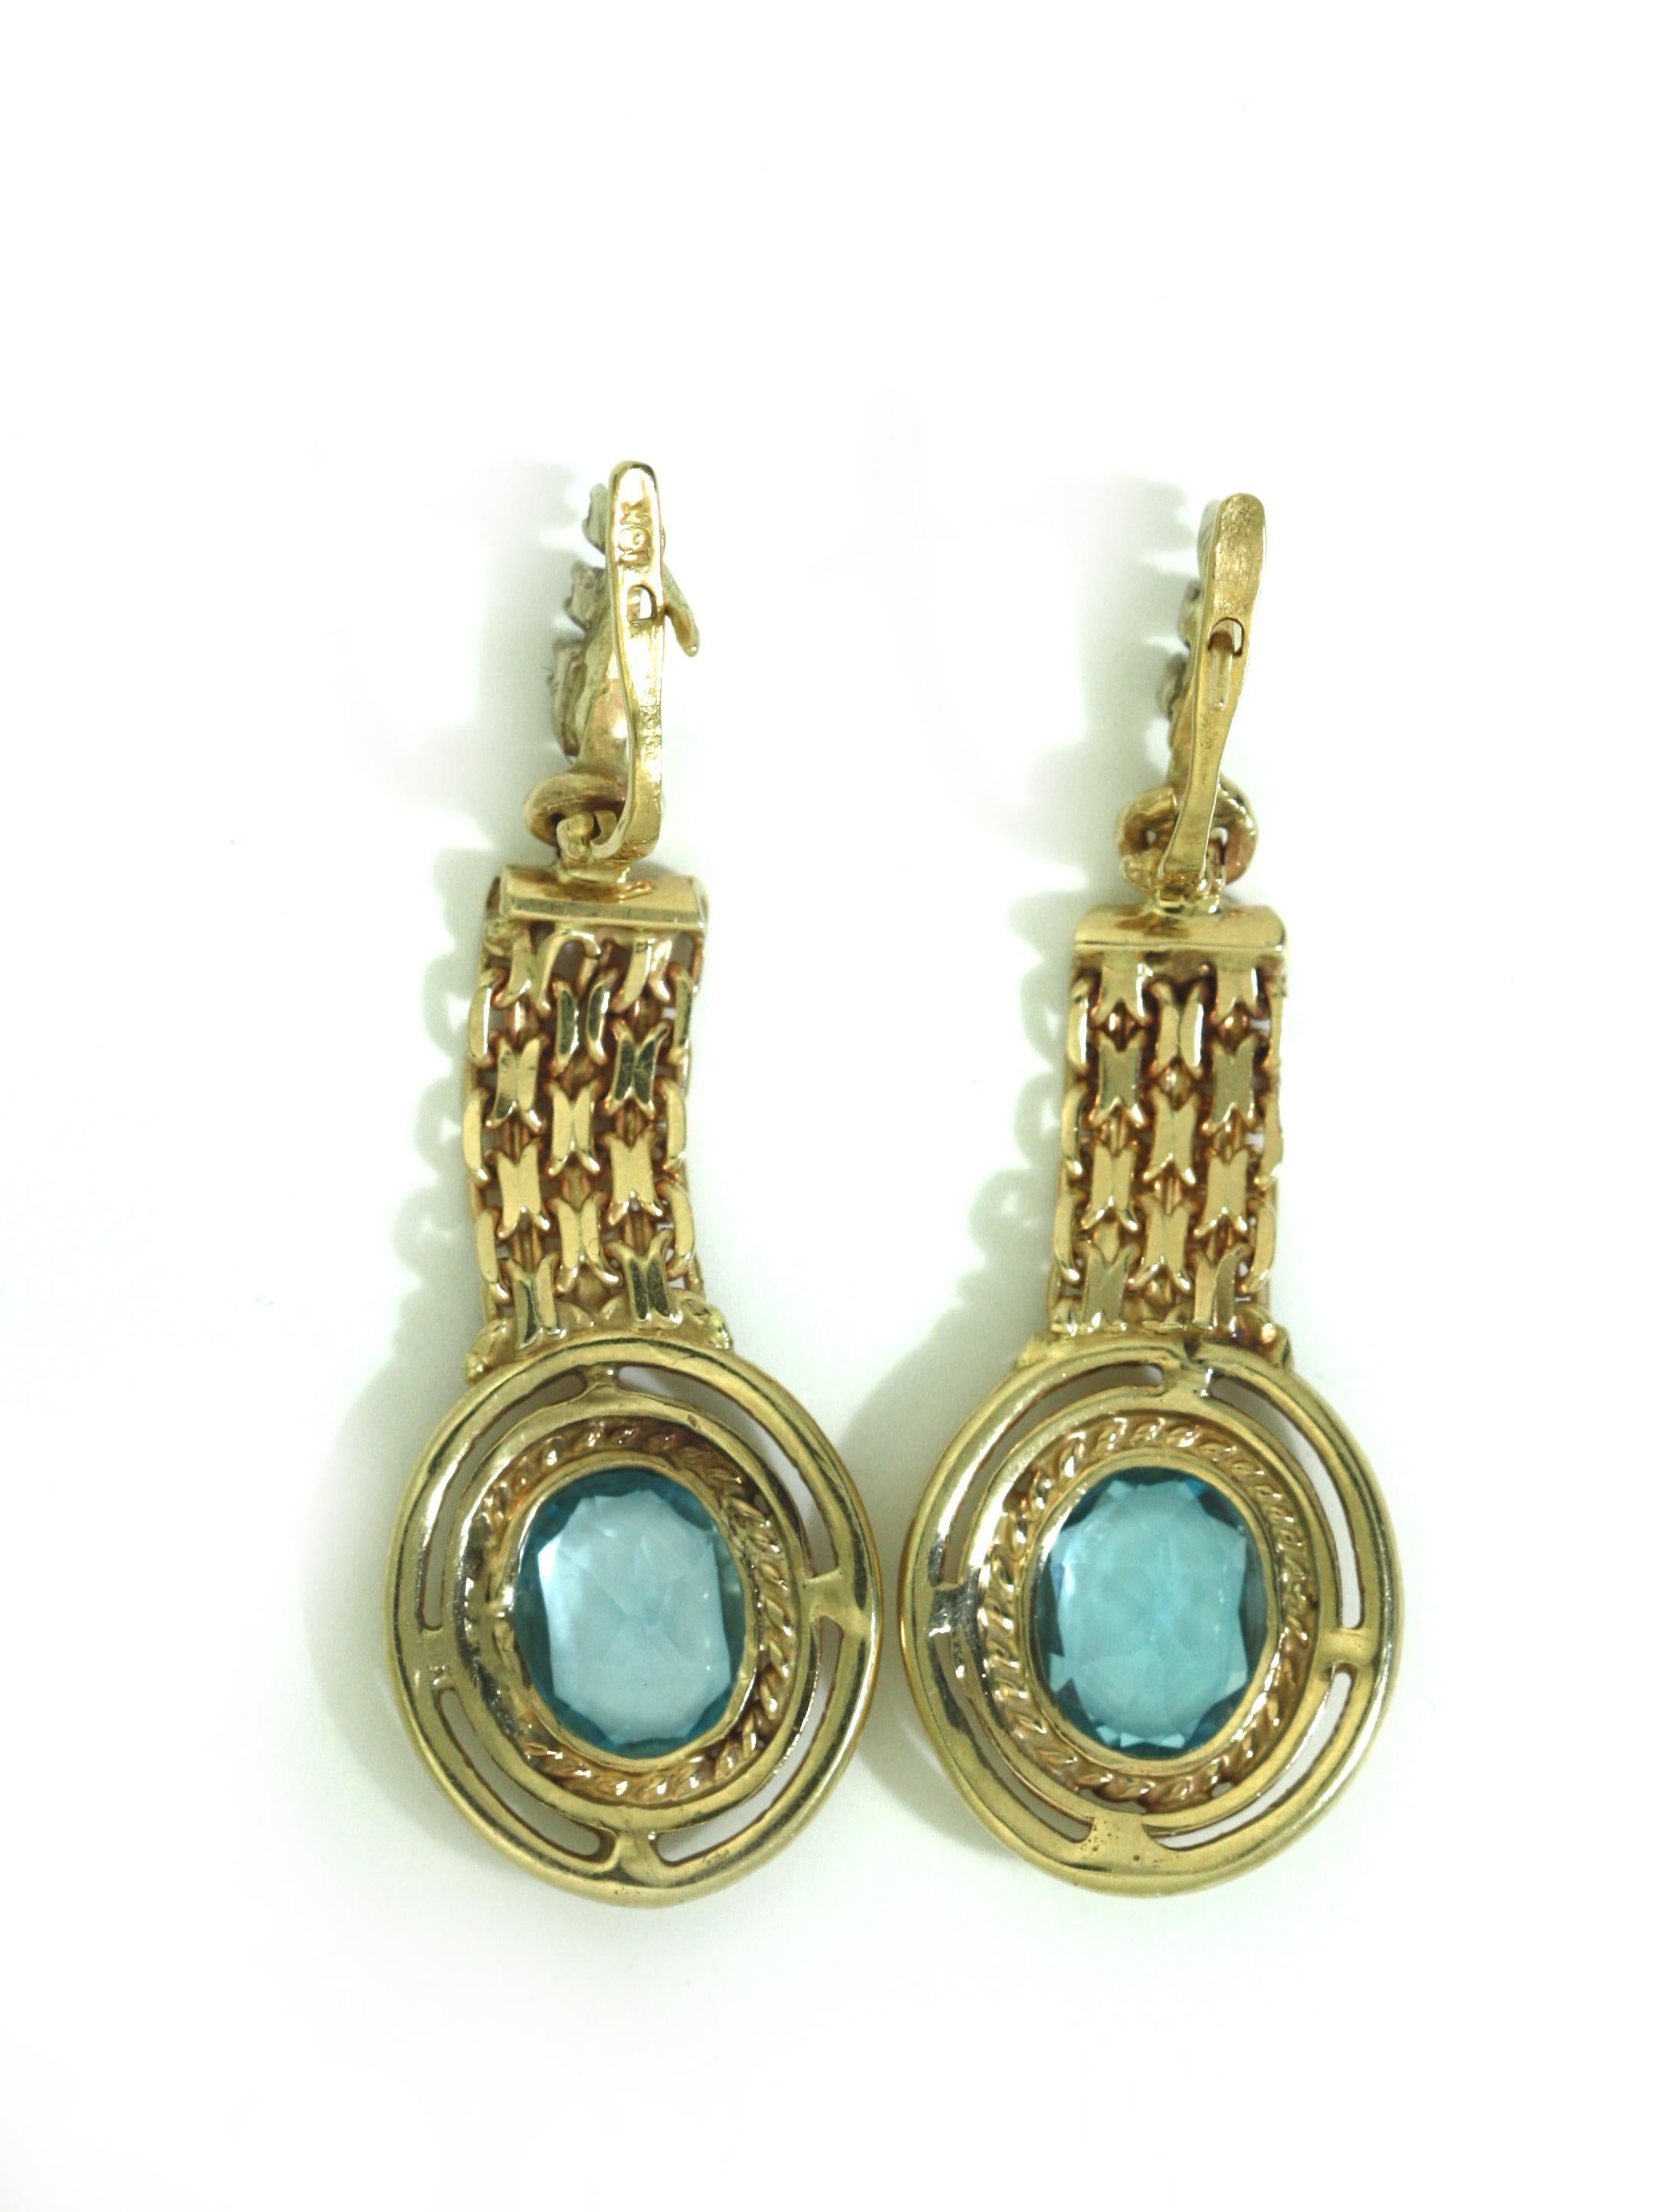 
Gold, Blue Topaz and Diamond Earrings
Each earring featuring a oval-shaped blue topaz to the center of a cluster of round brilliant-cut diamonds suspended by a diamond-set loop.
Diamonds weighing approximately 0.40 carats
Two Blue topaz weighing a